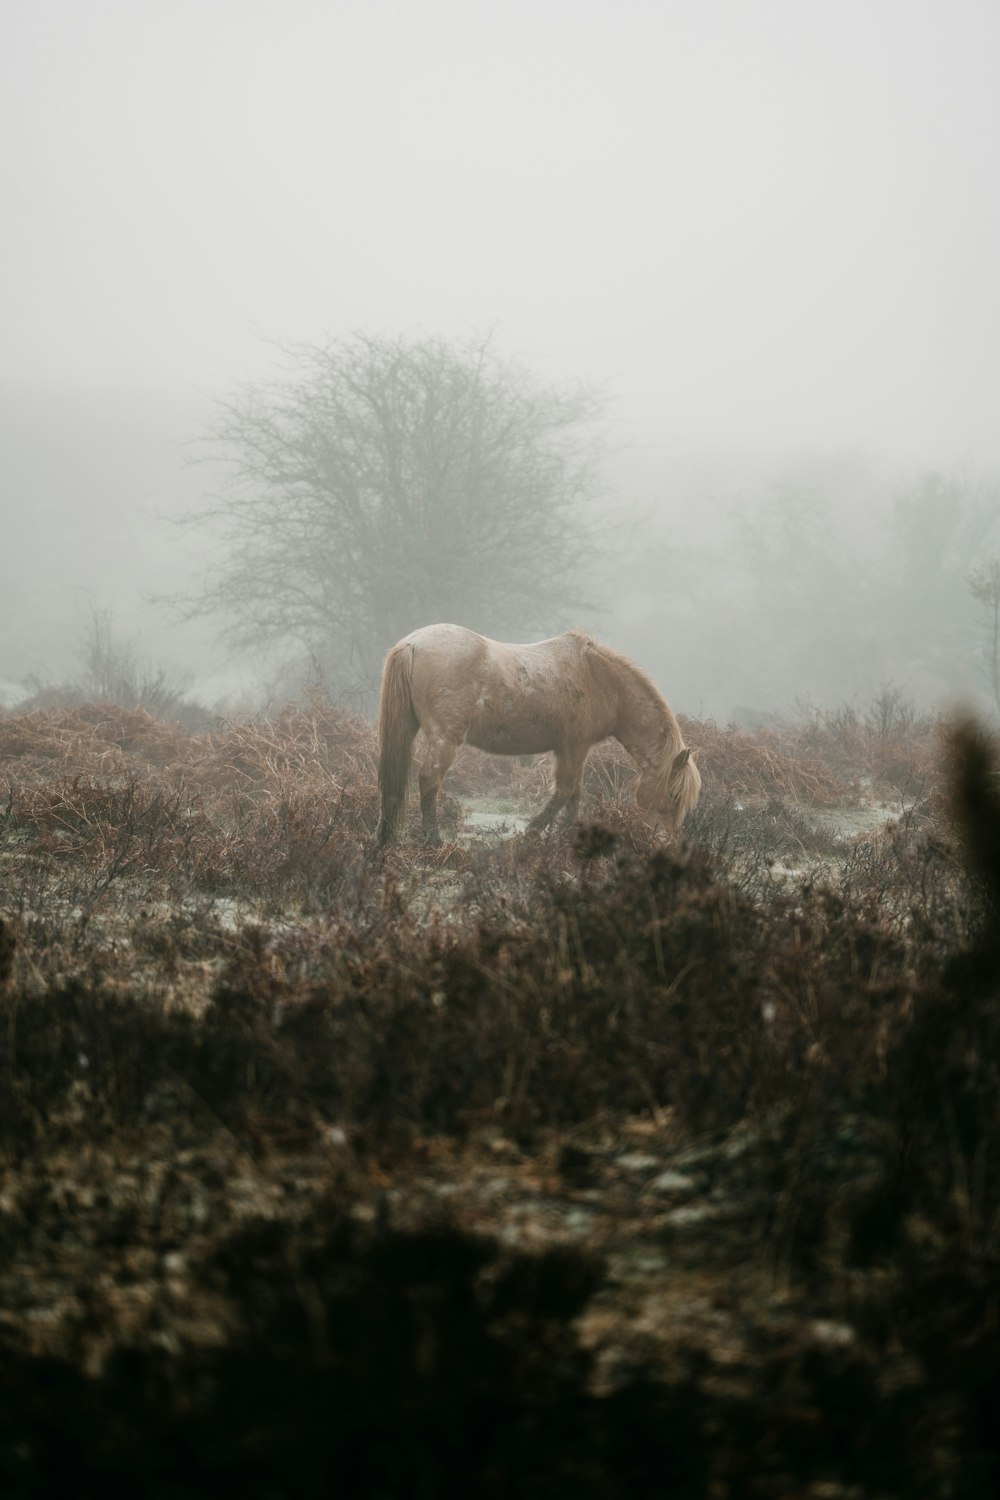 a horse grazing in a field on a foggy day